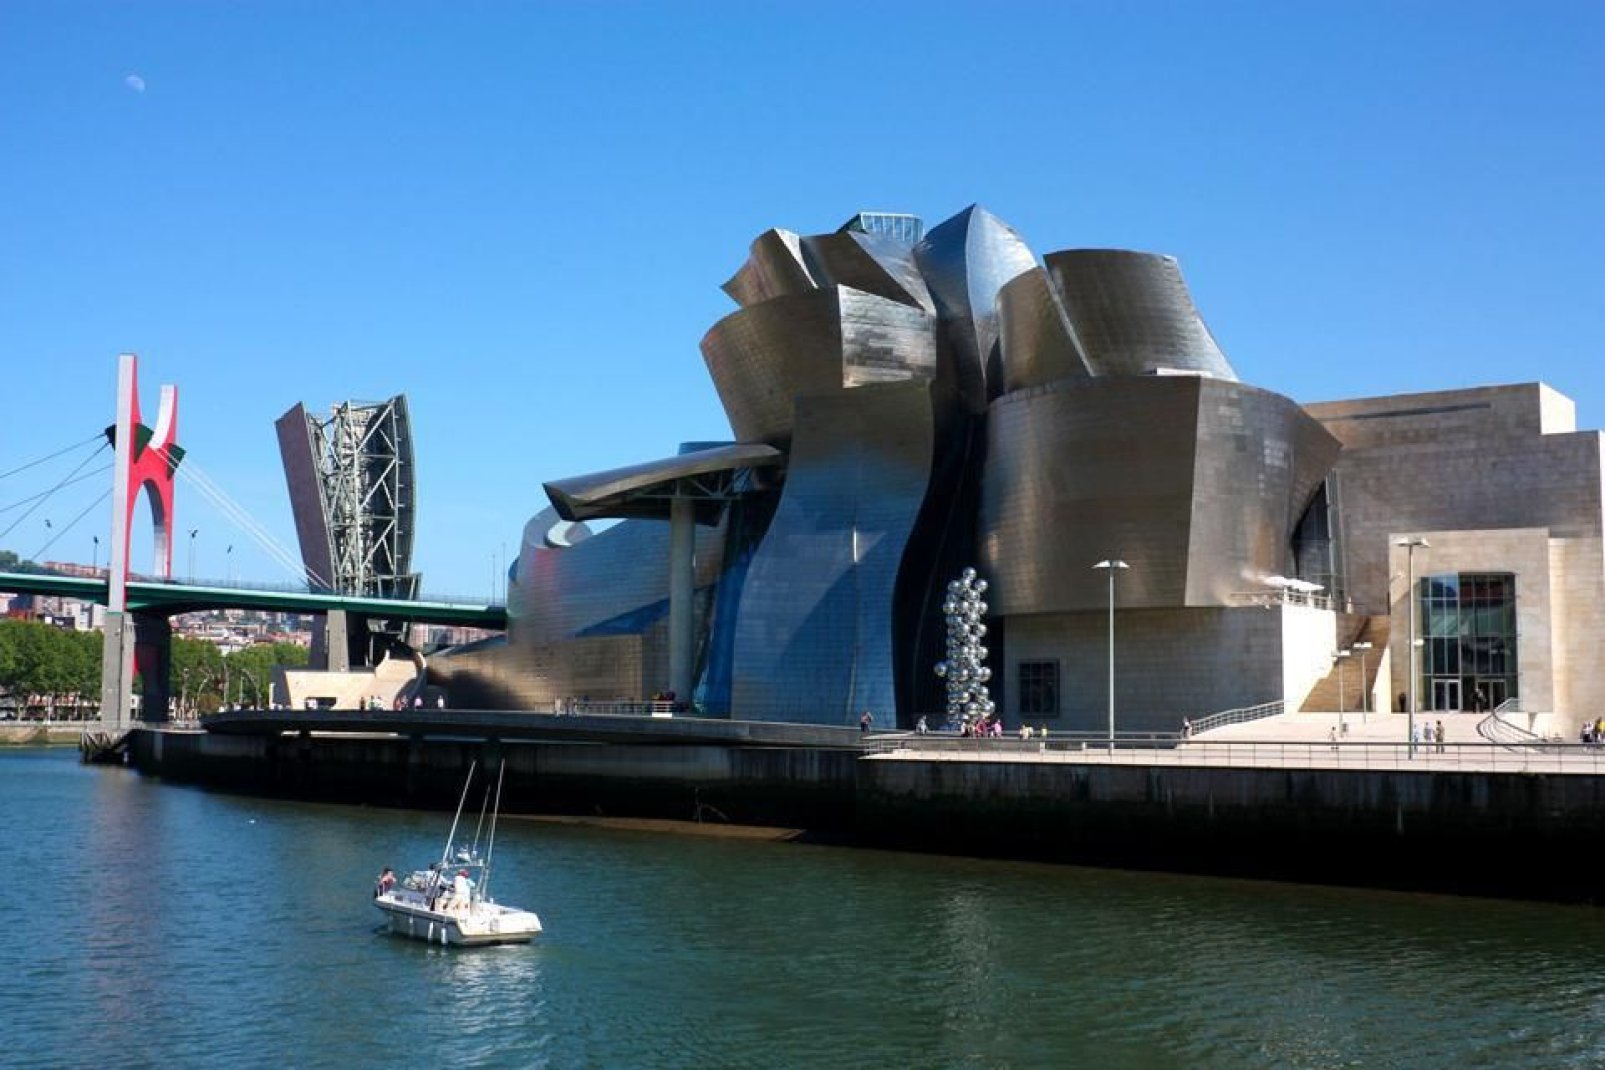 This building conceived and designed by Frank Gehry symbolises the shipbuilding industry through its shape and the materials used.